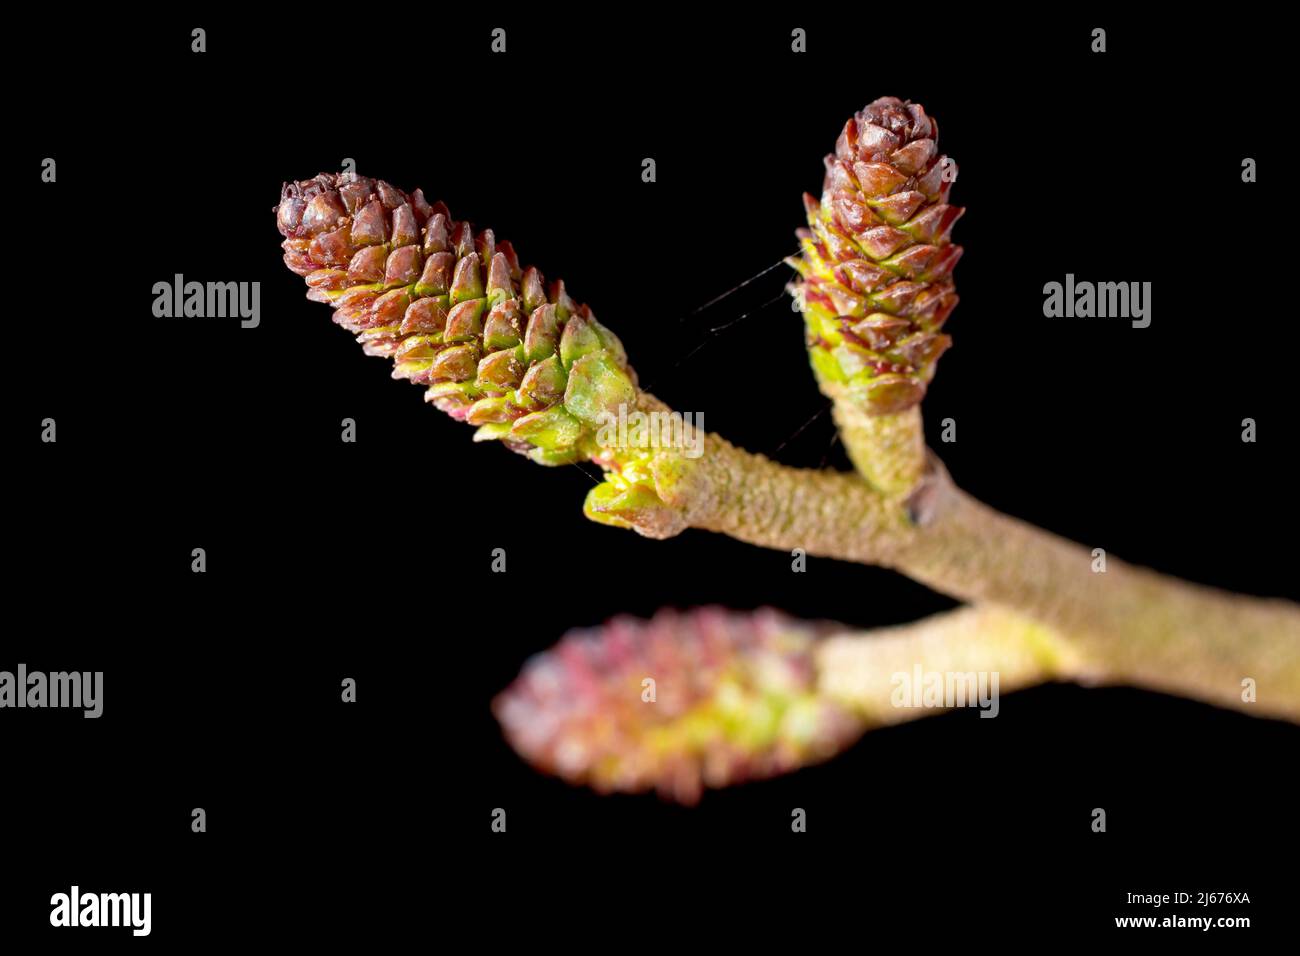 Alder (alnus glutinosa), close up of the female flowers of the tree isolated against a black background. Stock Photo